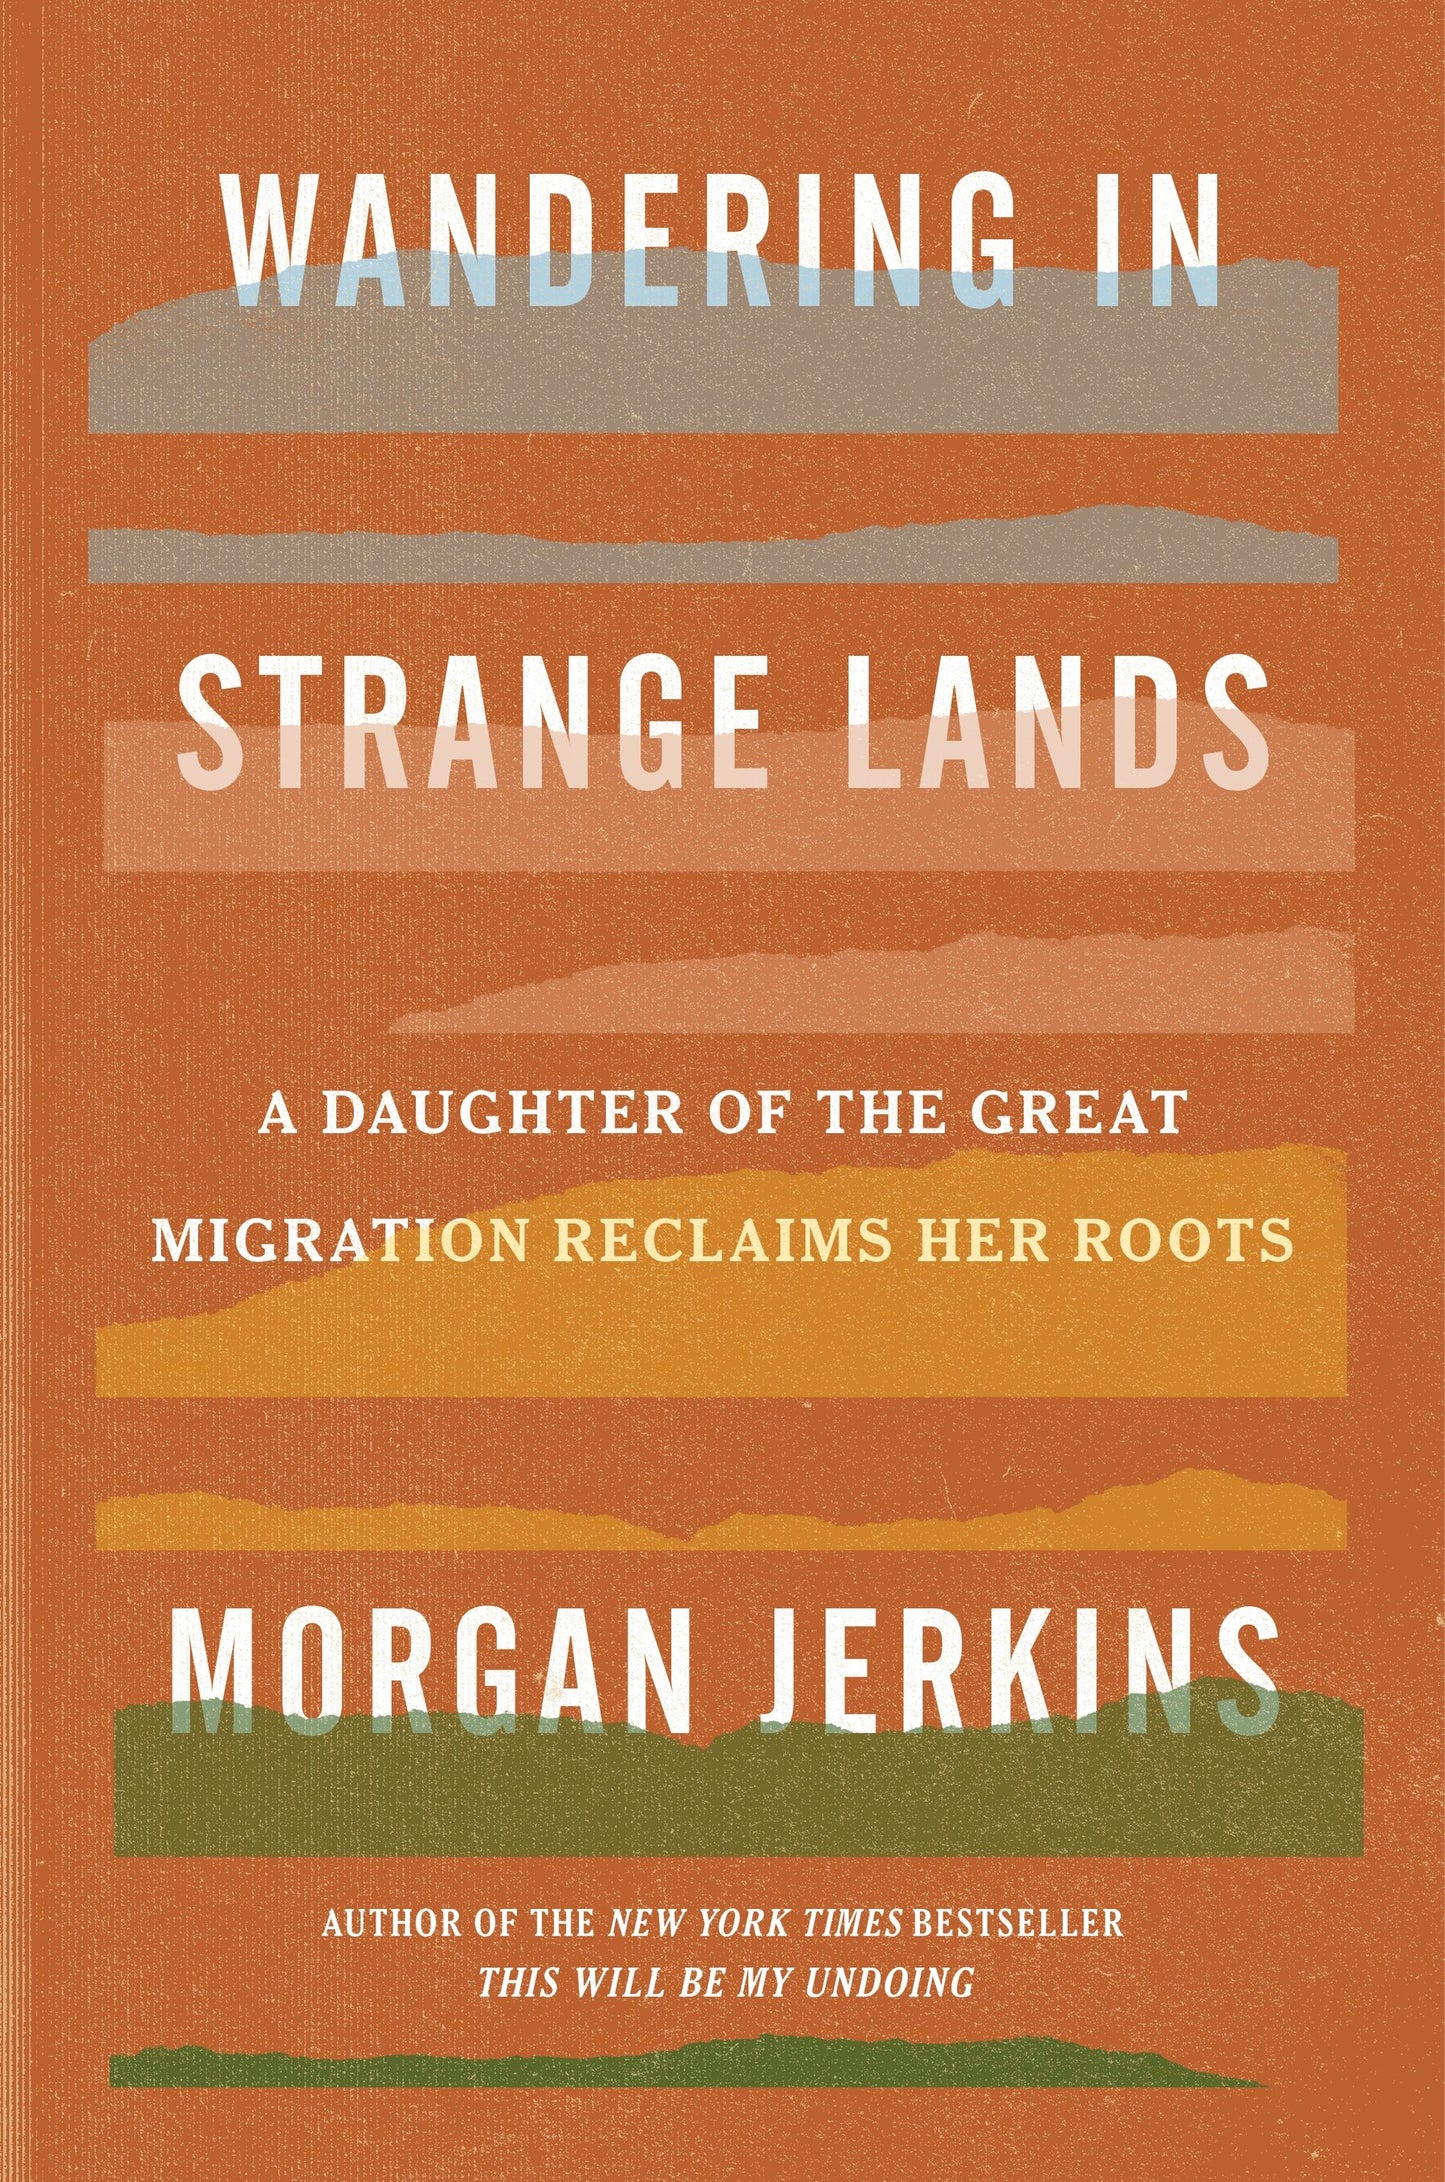 Wandering in Strange Lands // A Daughter of the Great Migration Reclaims Her Roots